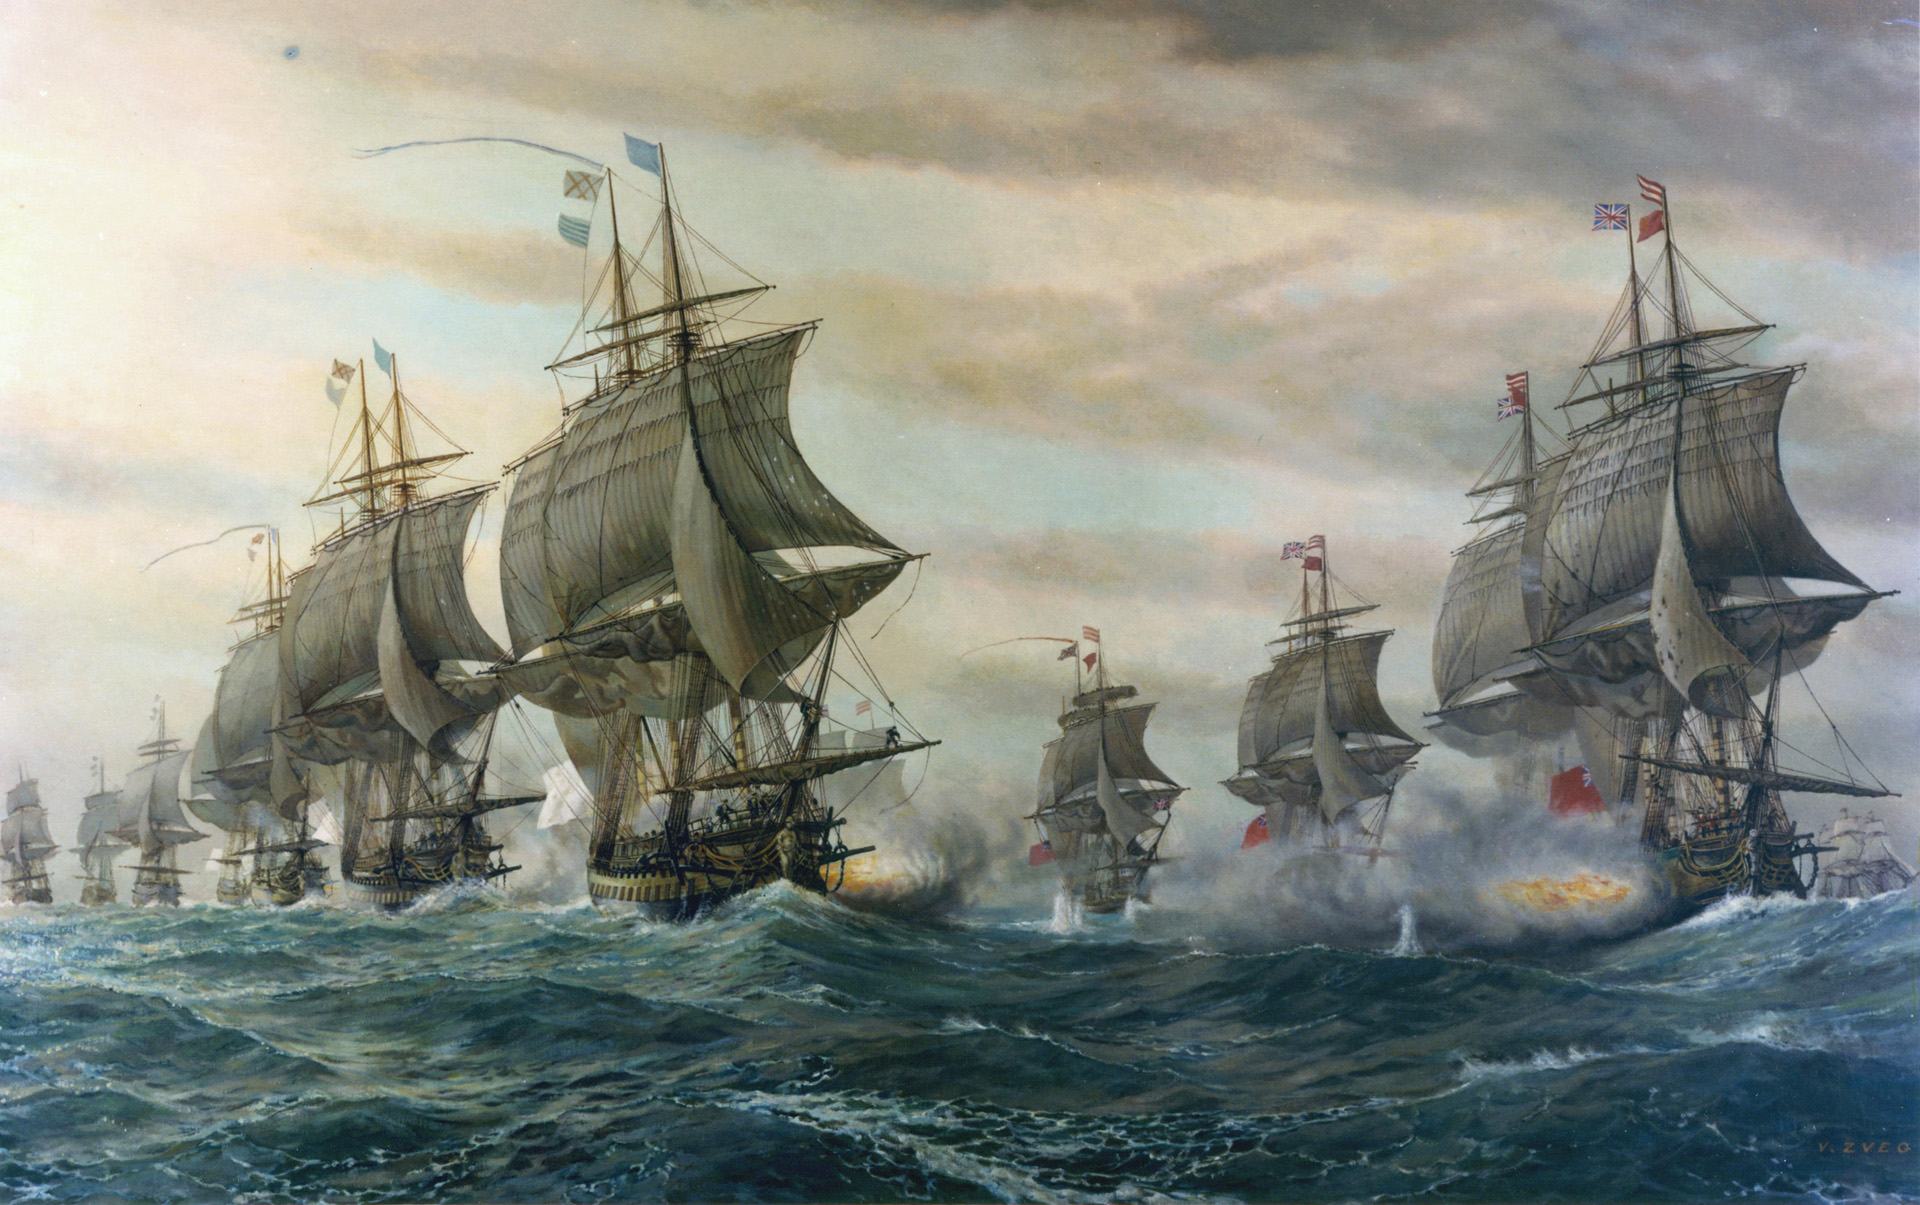 The British fleet (right) trades broadsides with the French fleet during the height of battle. Confusion with signals plagued the British throughout the battle and prevented them from firing with maximum effect.